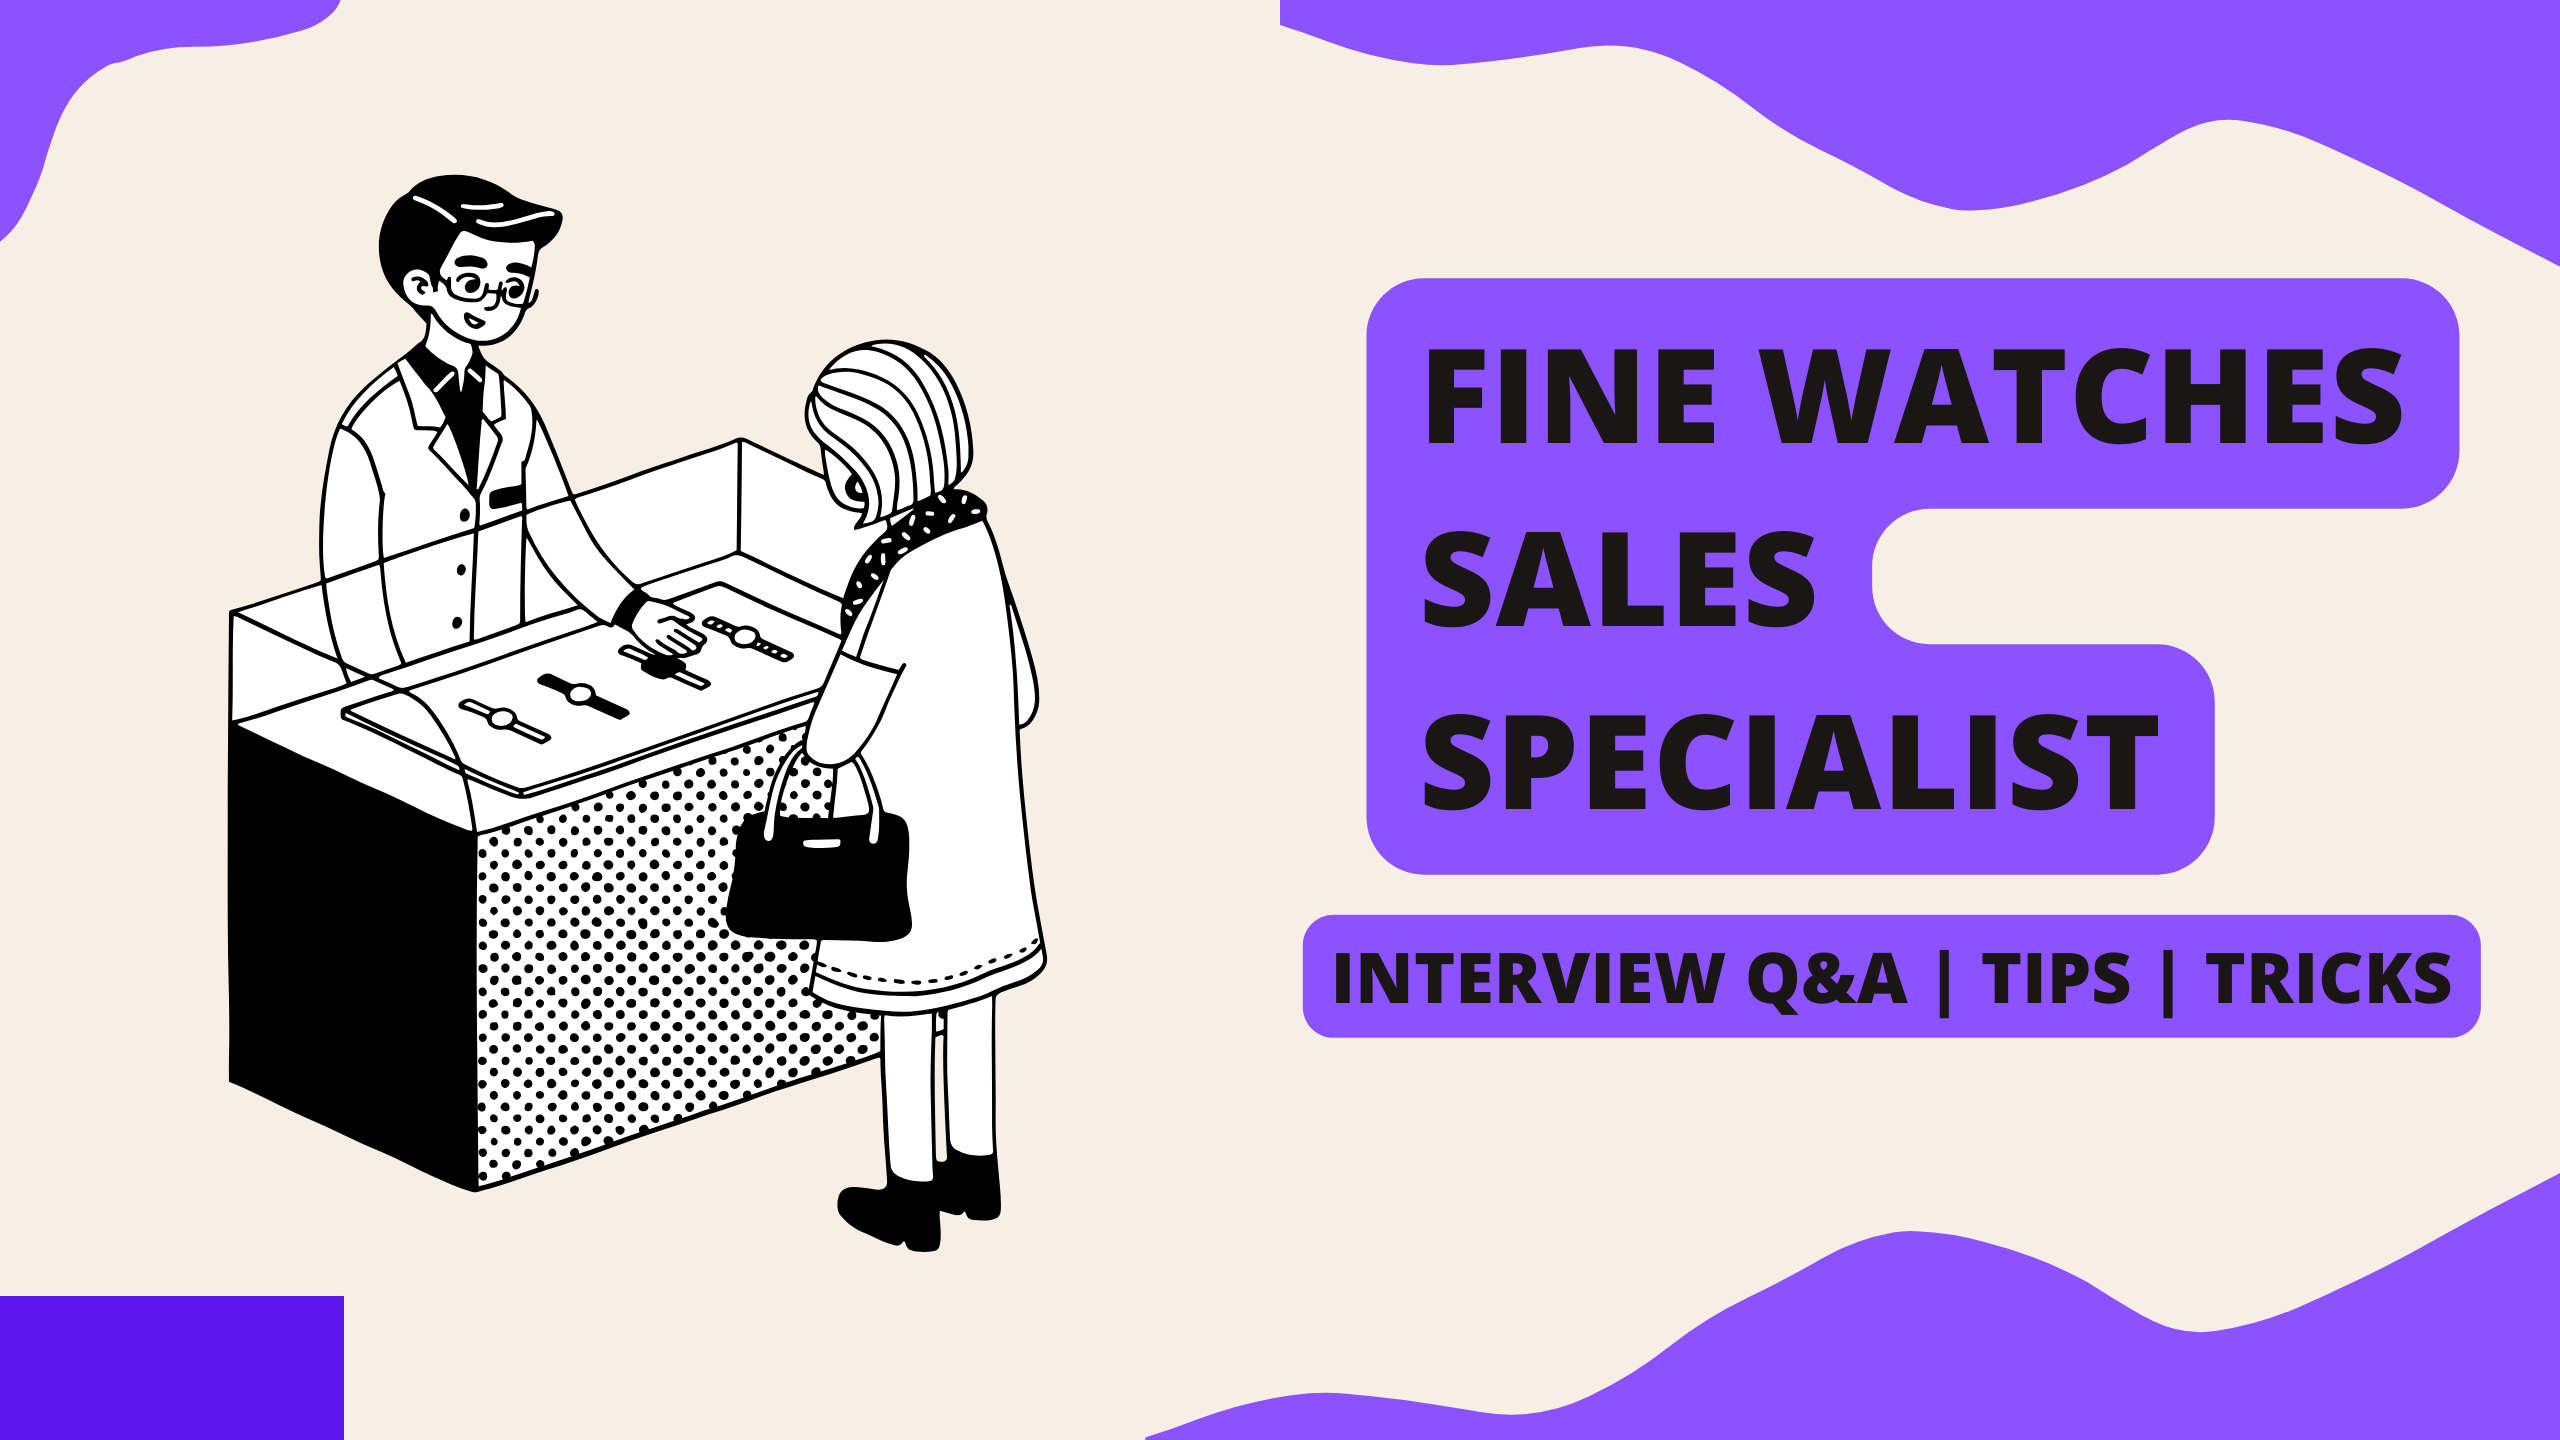 How to Prepare for Fine Watches Sales Specialist Interview? 20+ Q&A with Examples